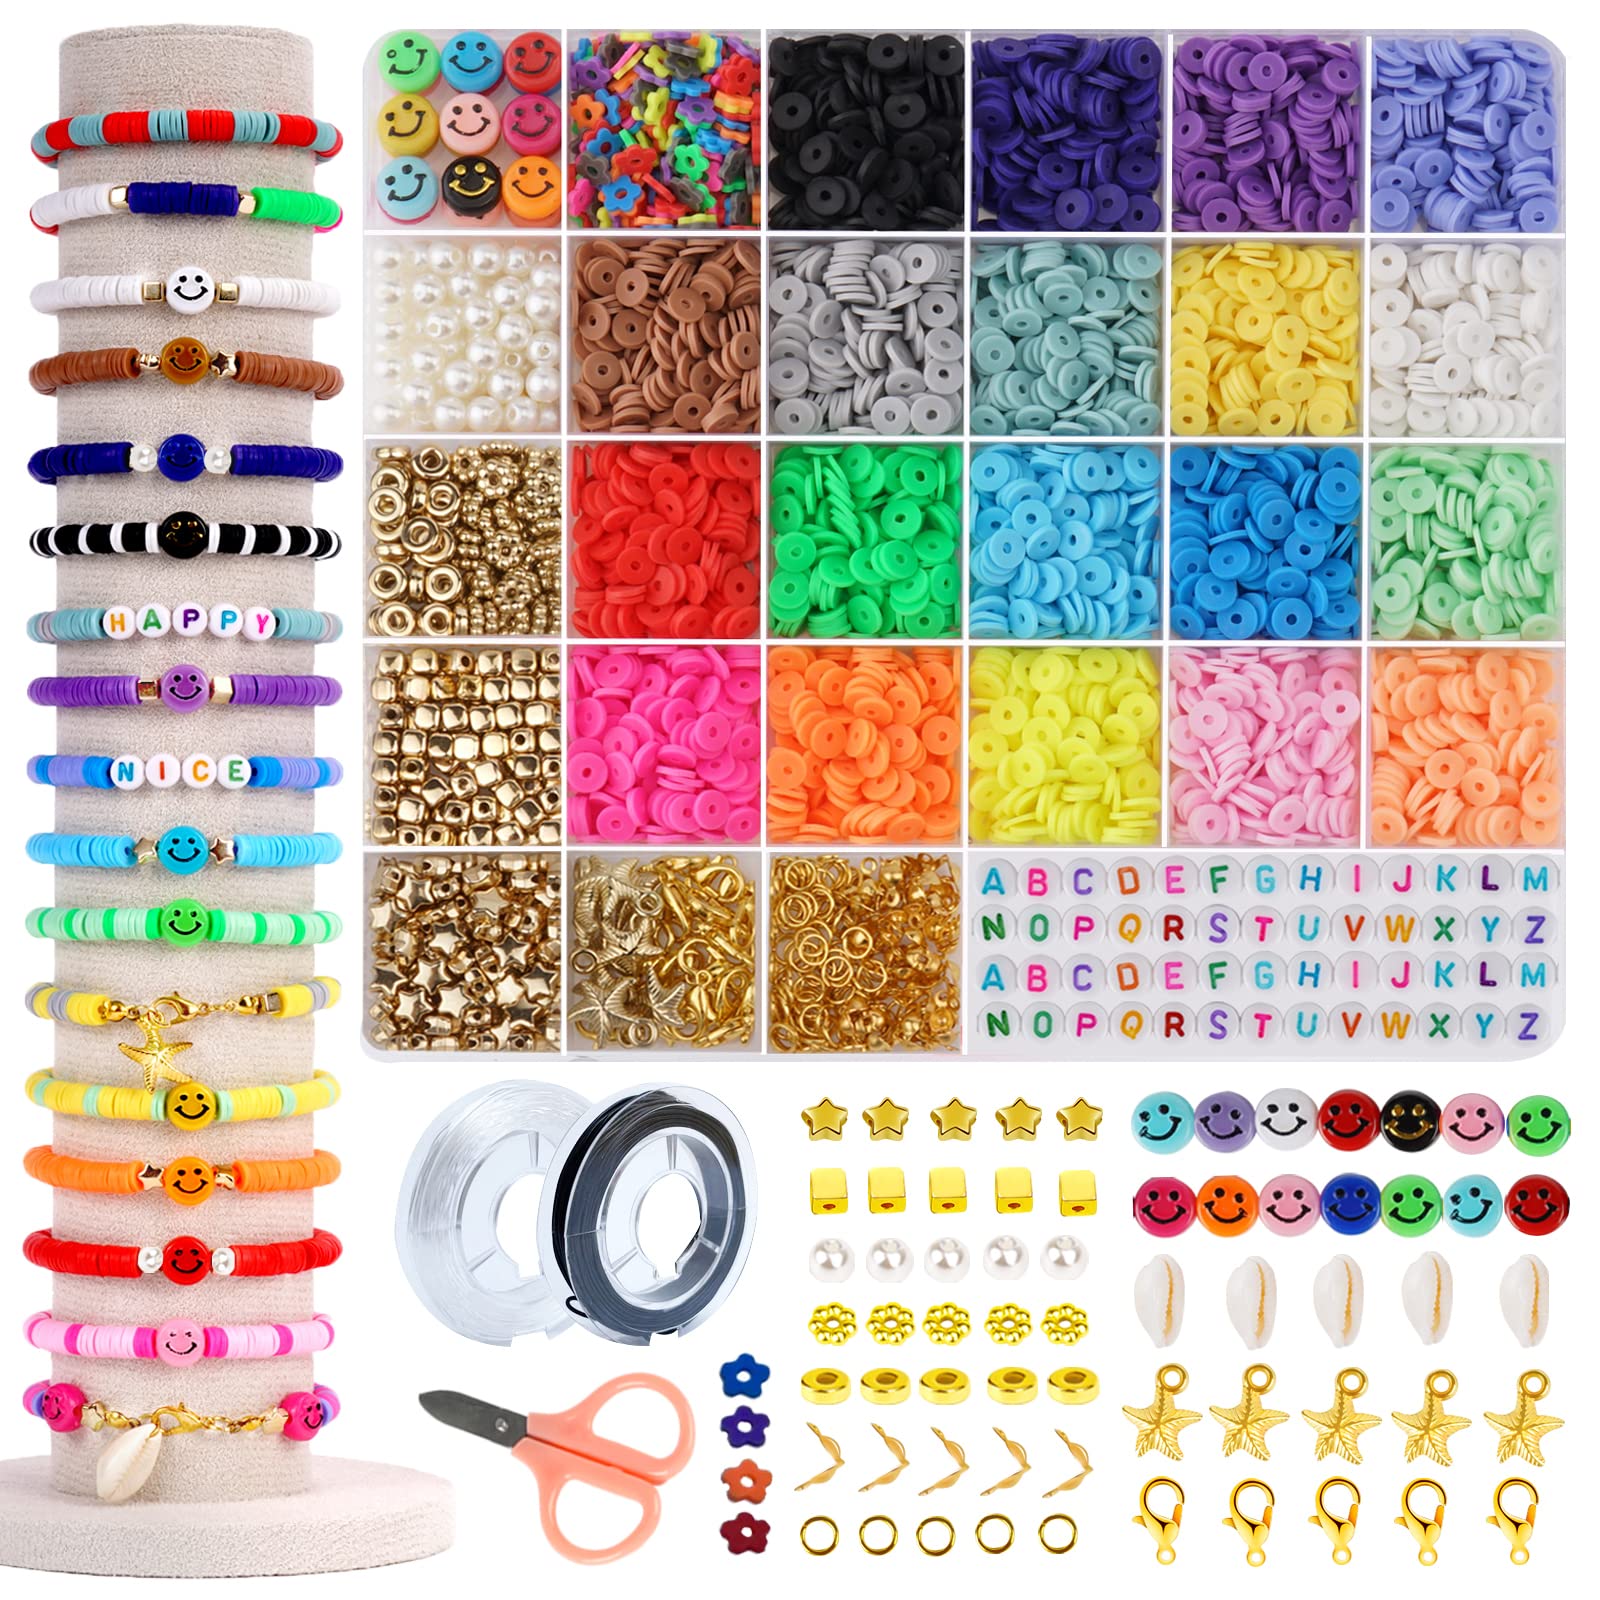 LZOUOWO 5300 Clay Beads for Bracelets Making Aesthetic Kit with